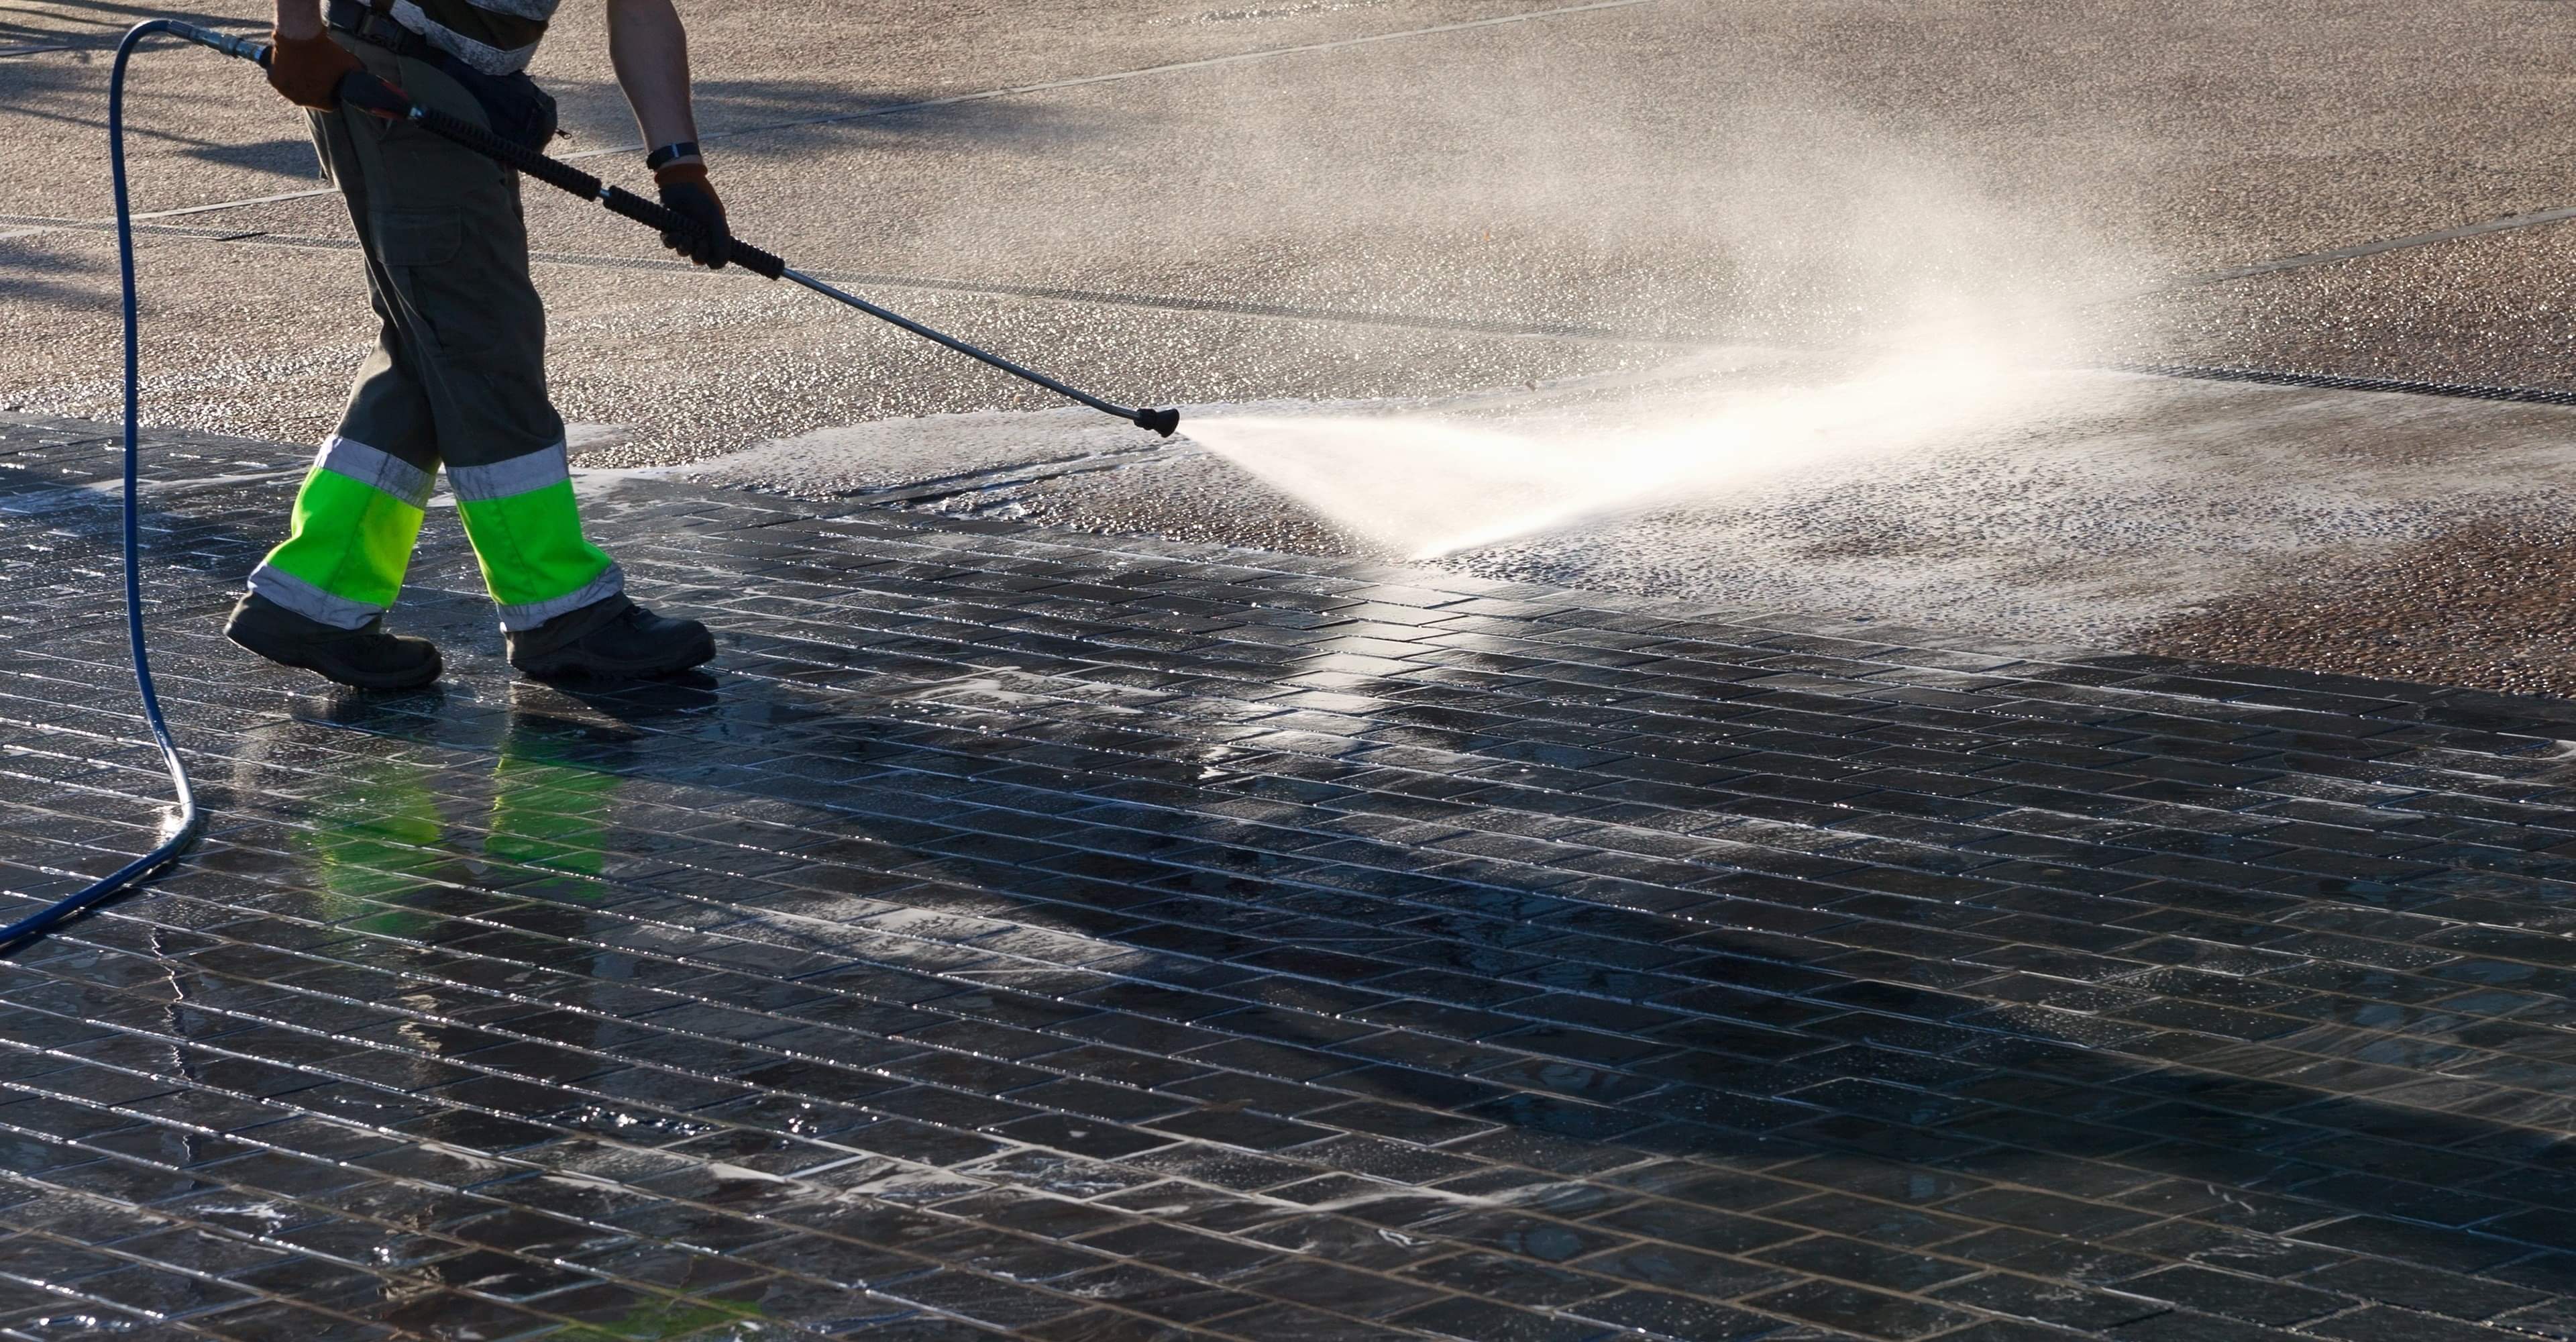 Pressure Washing Services In Deale Md